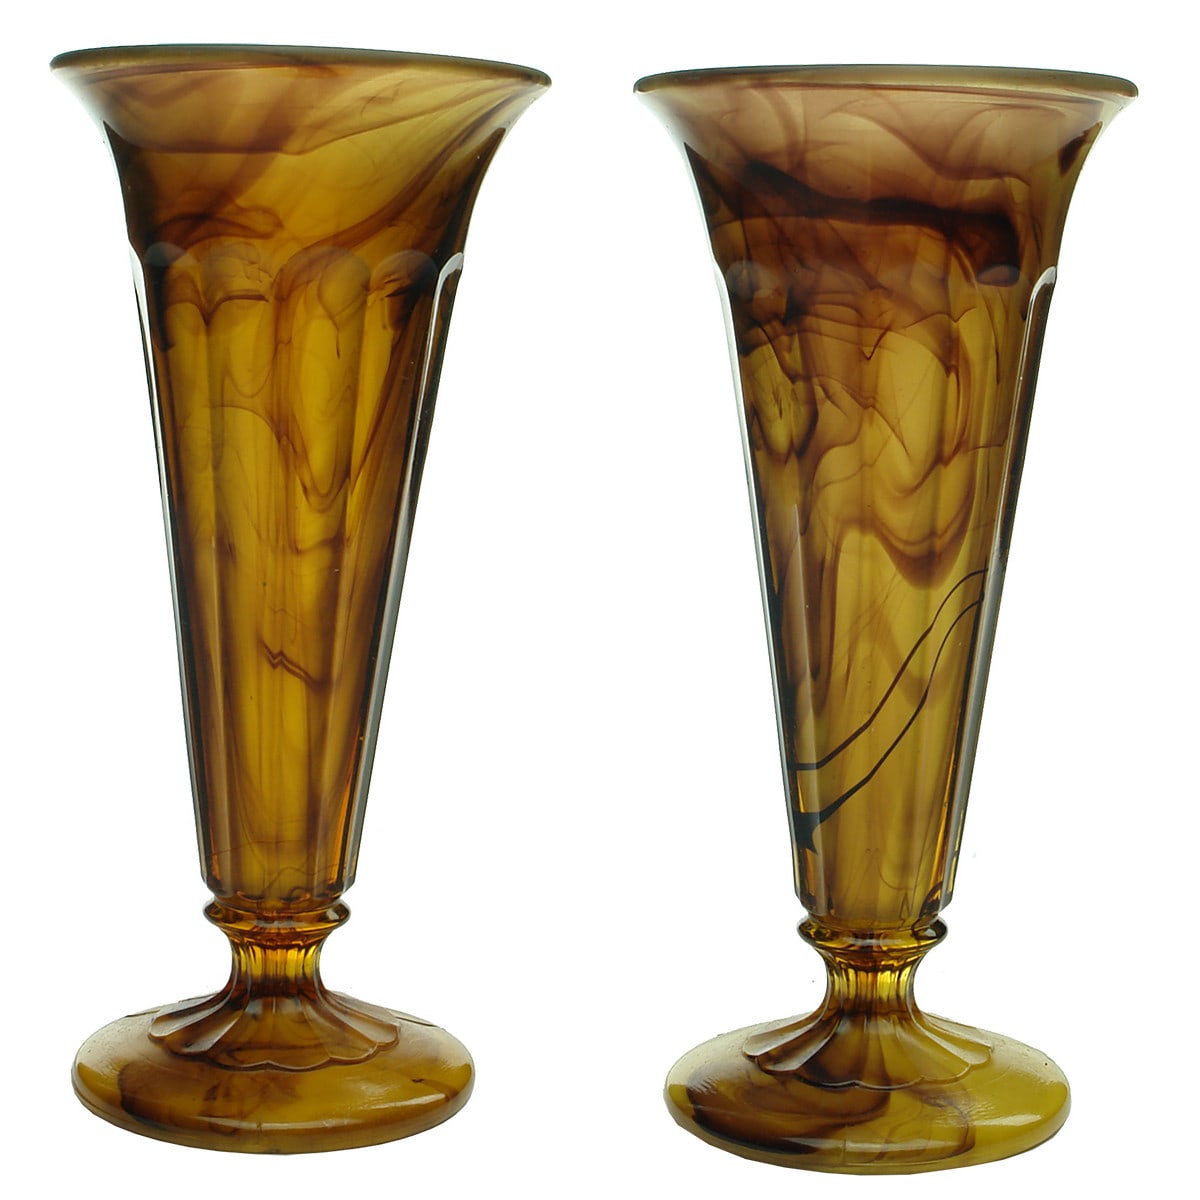 Pair of tall amber Cloud Glass Vases. Davidson glass.